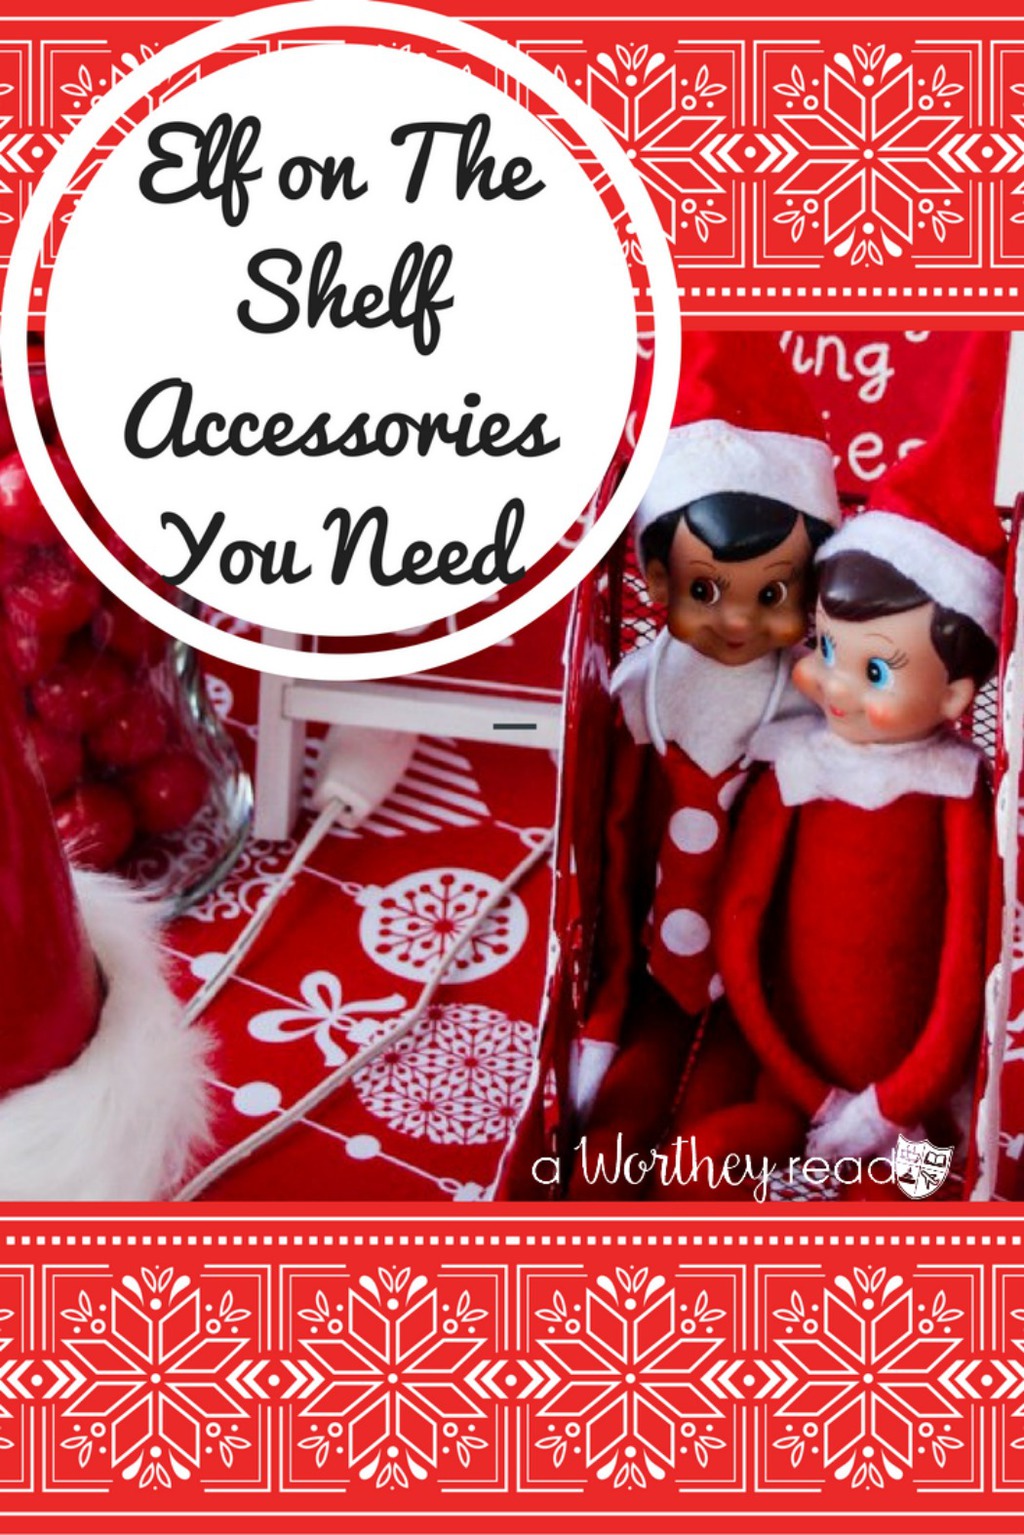 Elf on The Shelf Accessories You Need